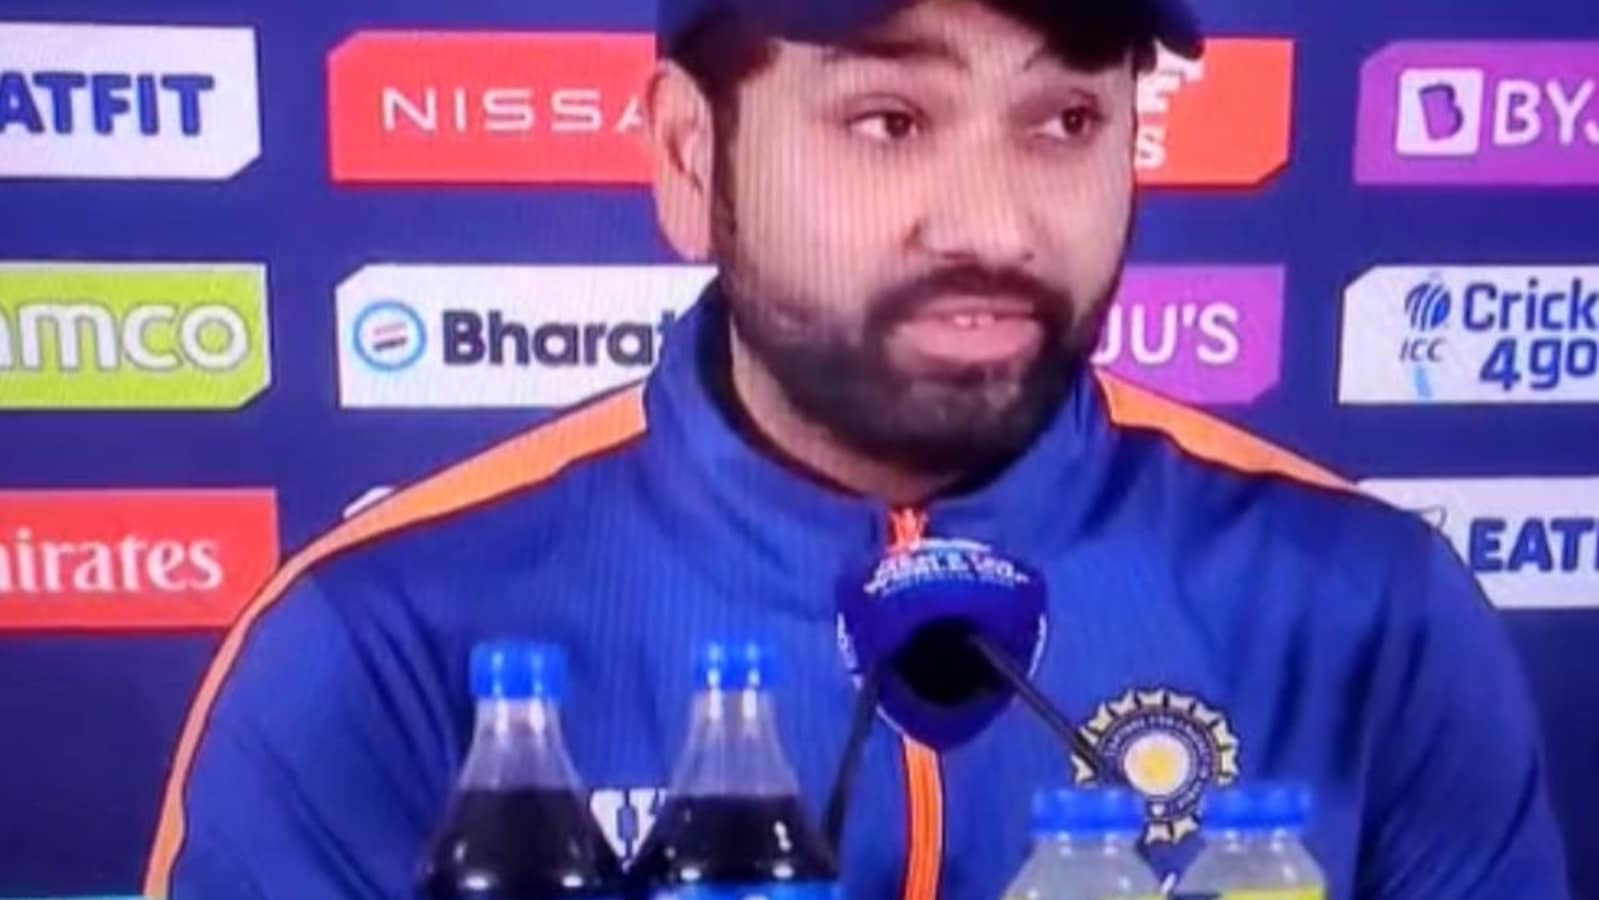 watch-rohit-sharma-s-amusing-mimicry-of-journalist-s-accent-after-india-beat-pakistan-will-leave-you-in-splits